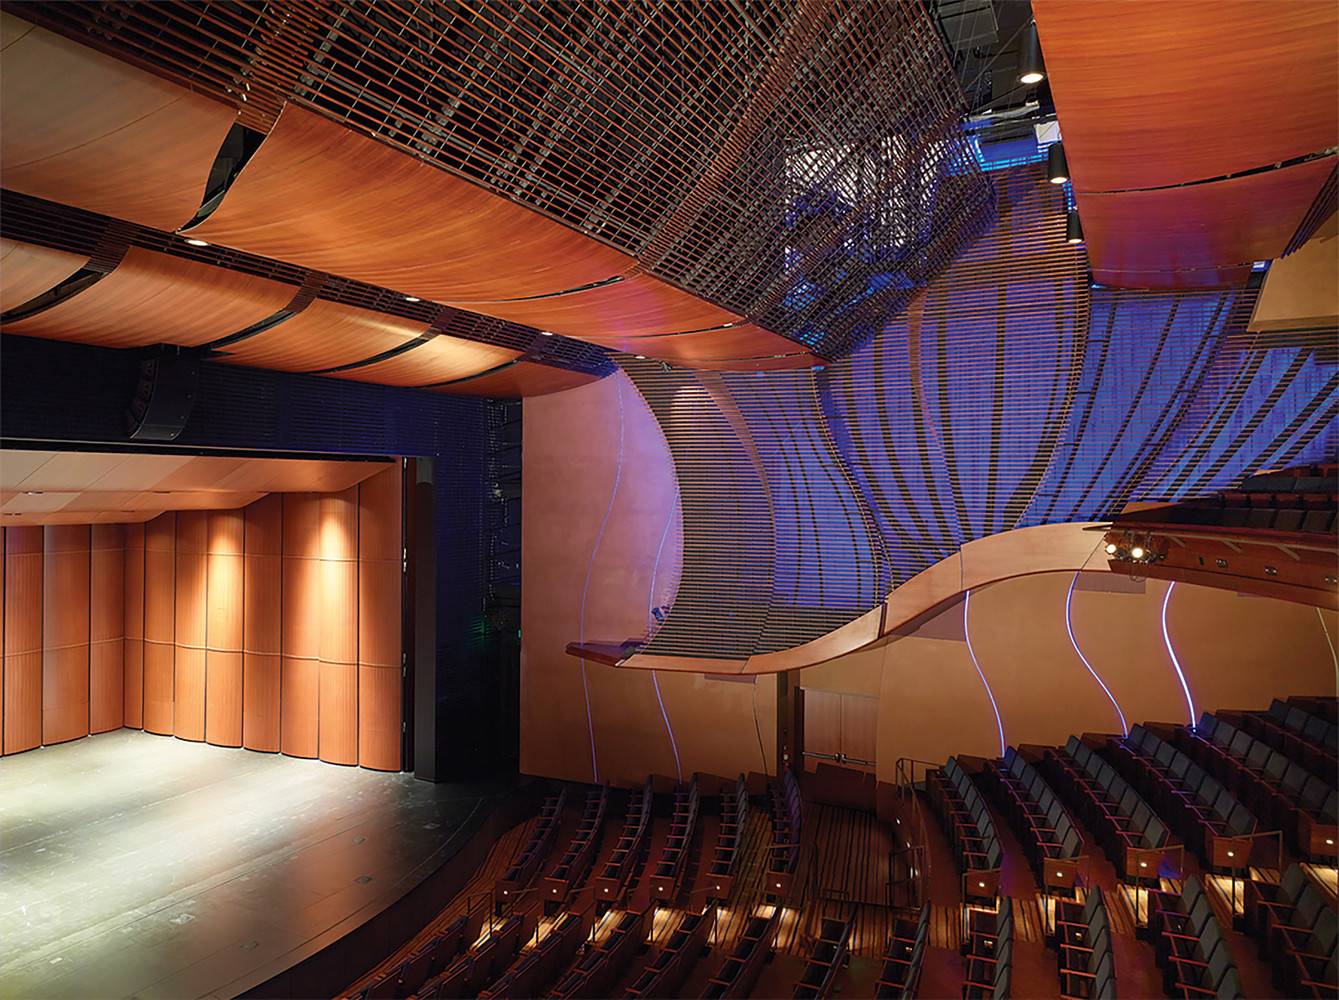 The 500-seat Bram Goldsmith Theater located inside The Wallis